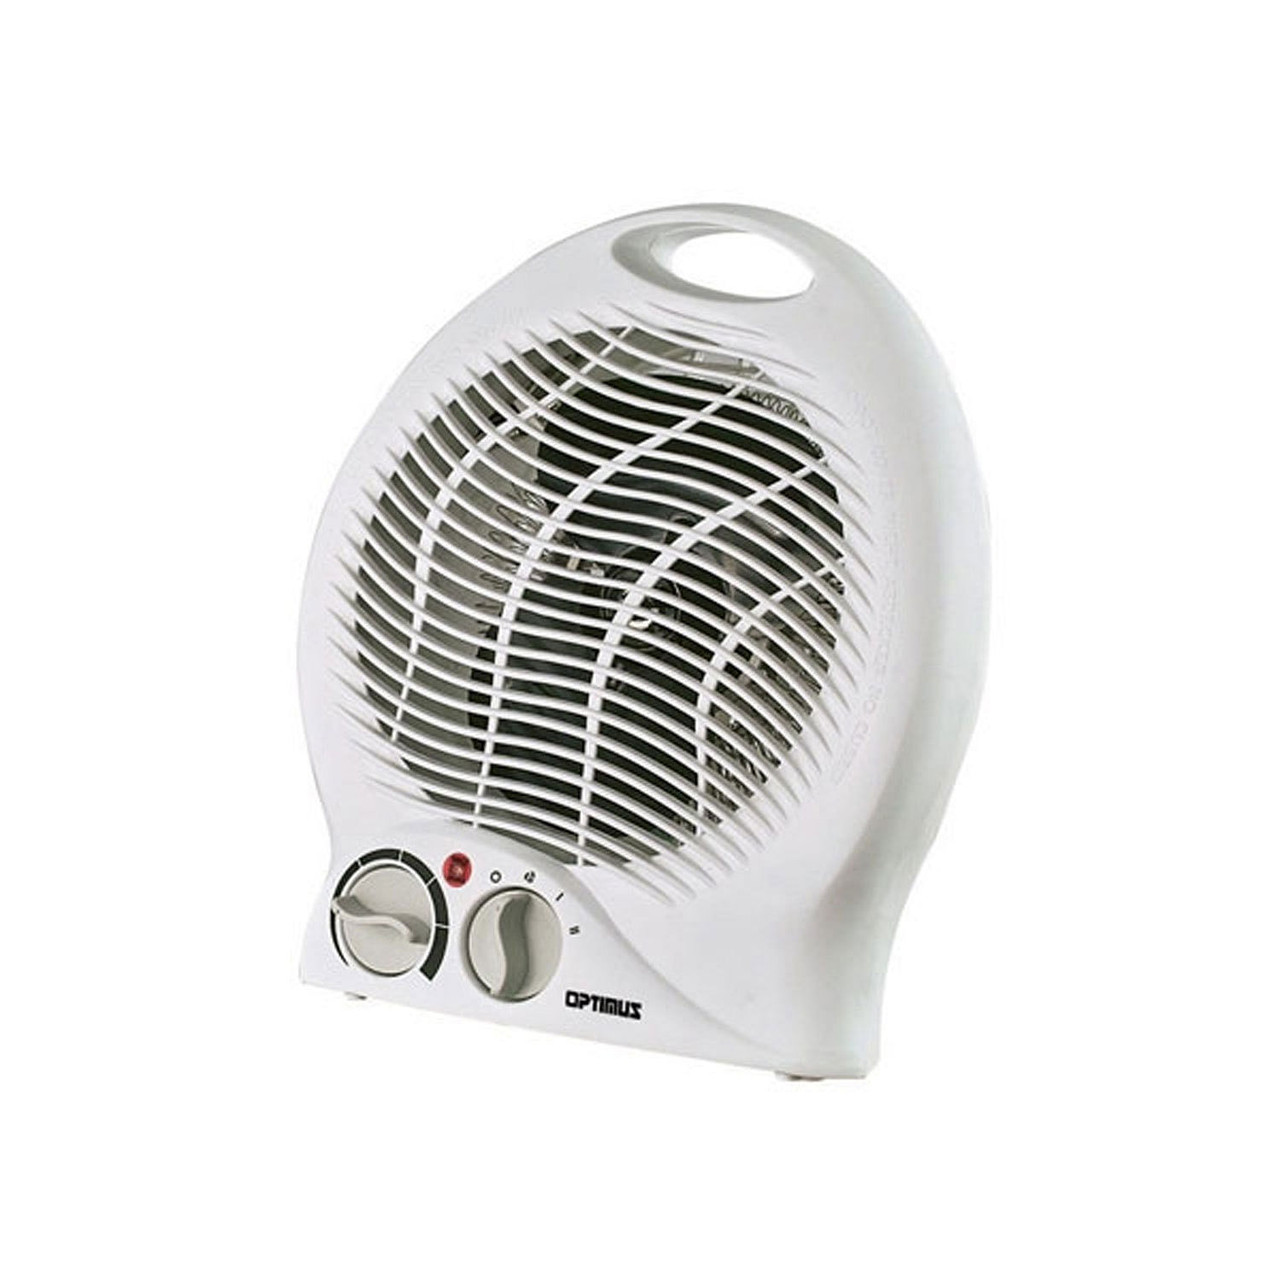 Optimus Portable Fan Heater with Thermostat in White